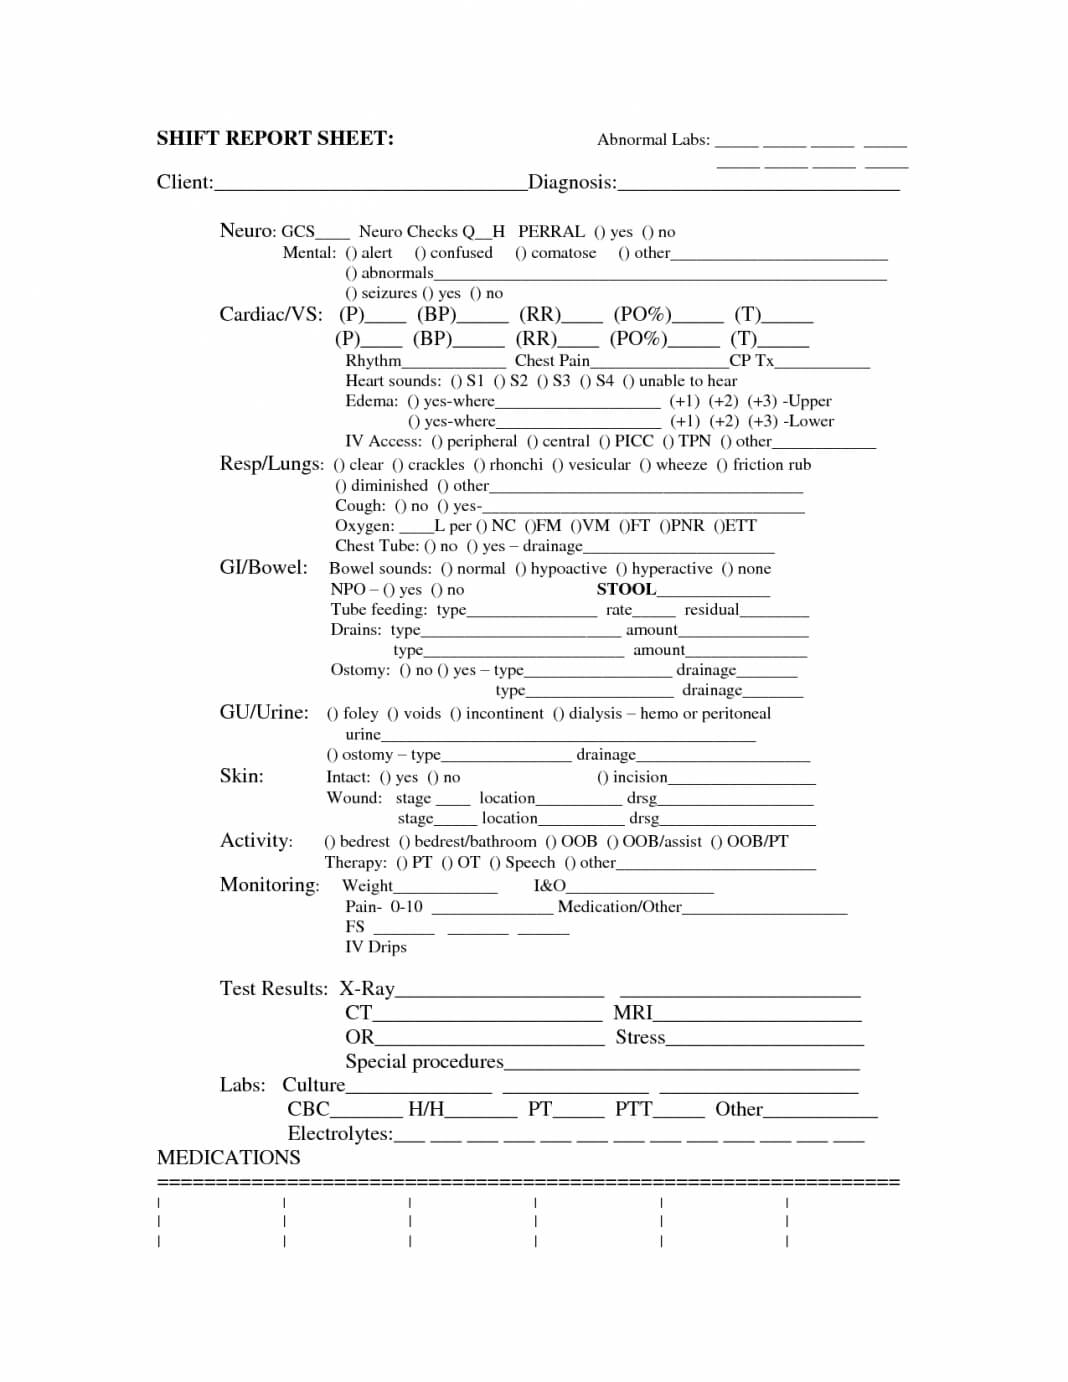 Shift Report Template Examples Restaurant Nursing Daily End With Regard To Nurse Shift Report Sheet Template